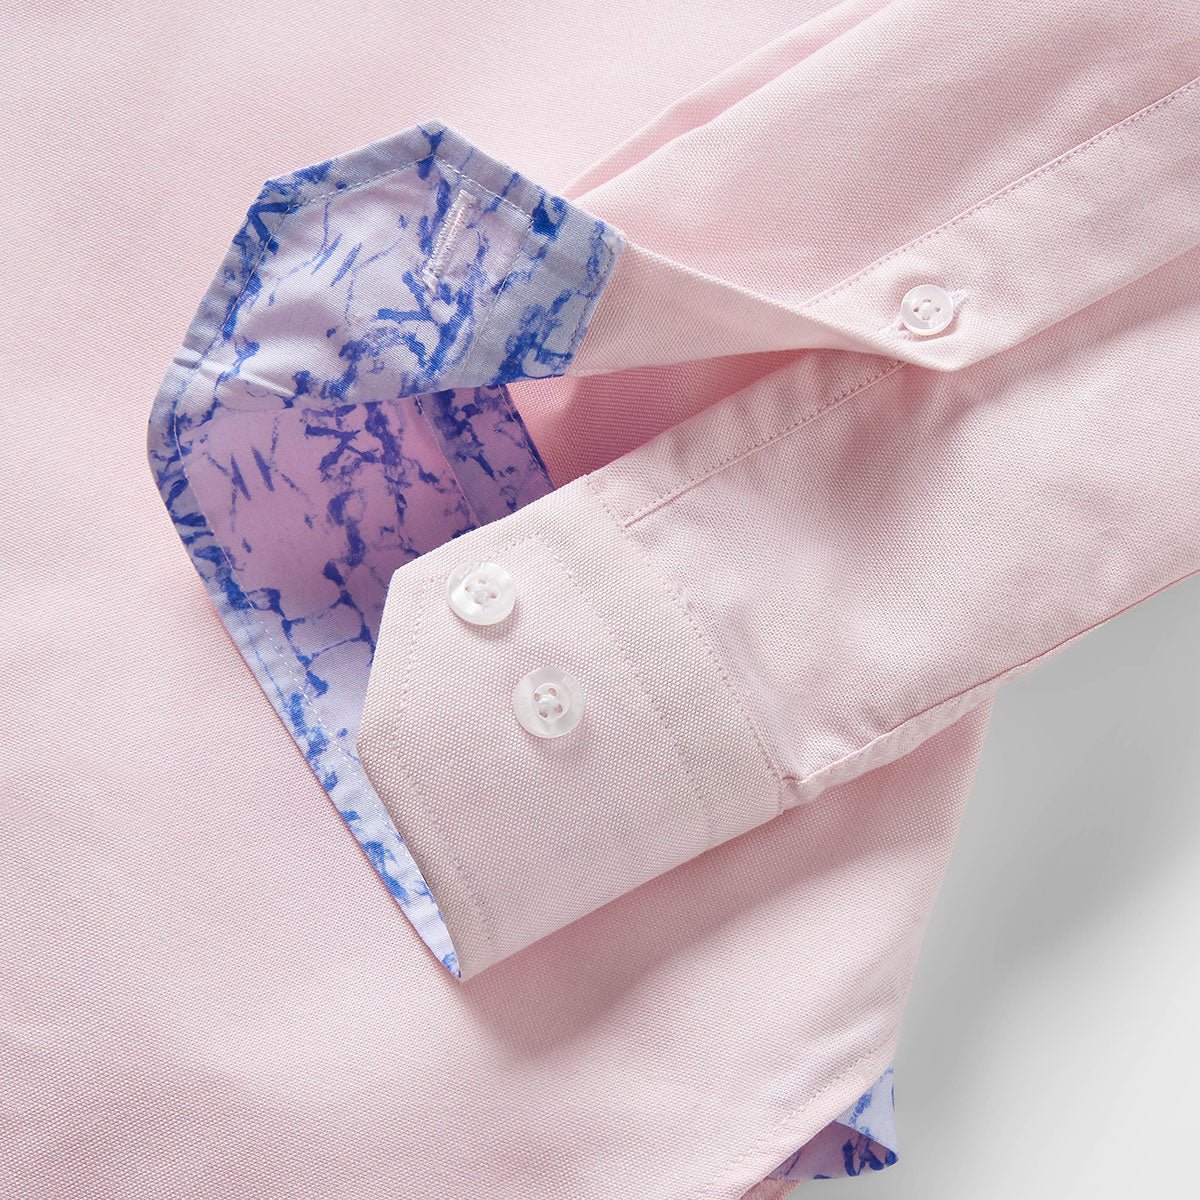 Pink Oxford with Know Your Mind Accents Button-Down Shirt - Blake Mill